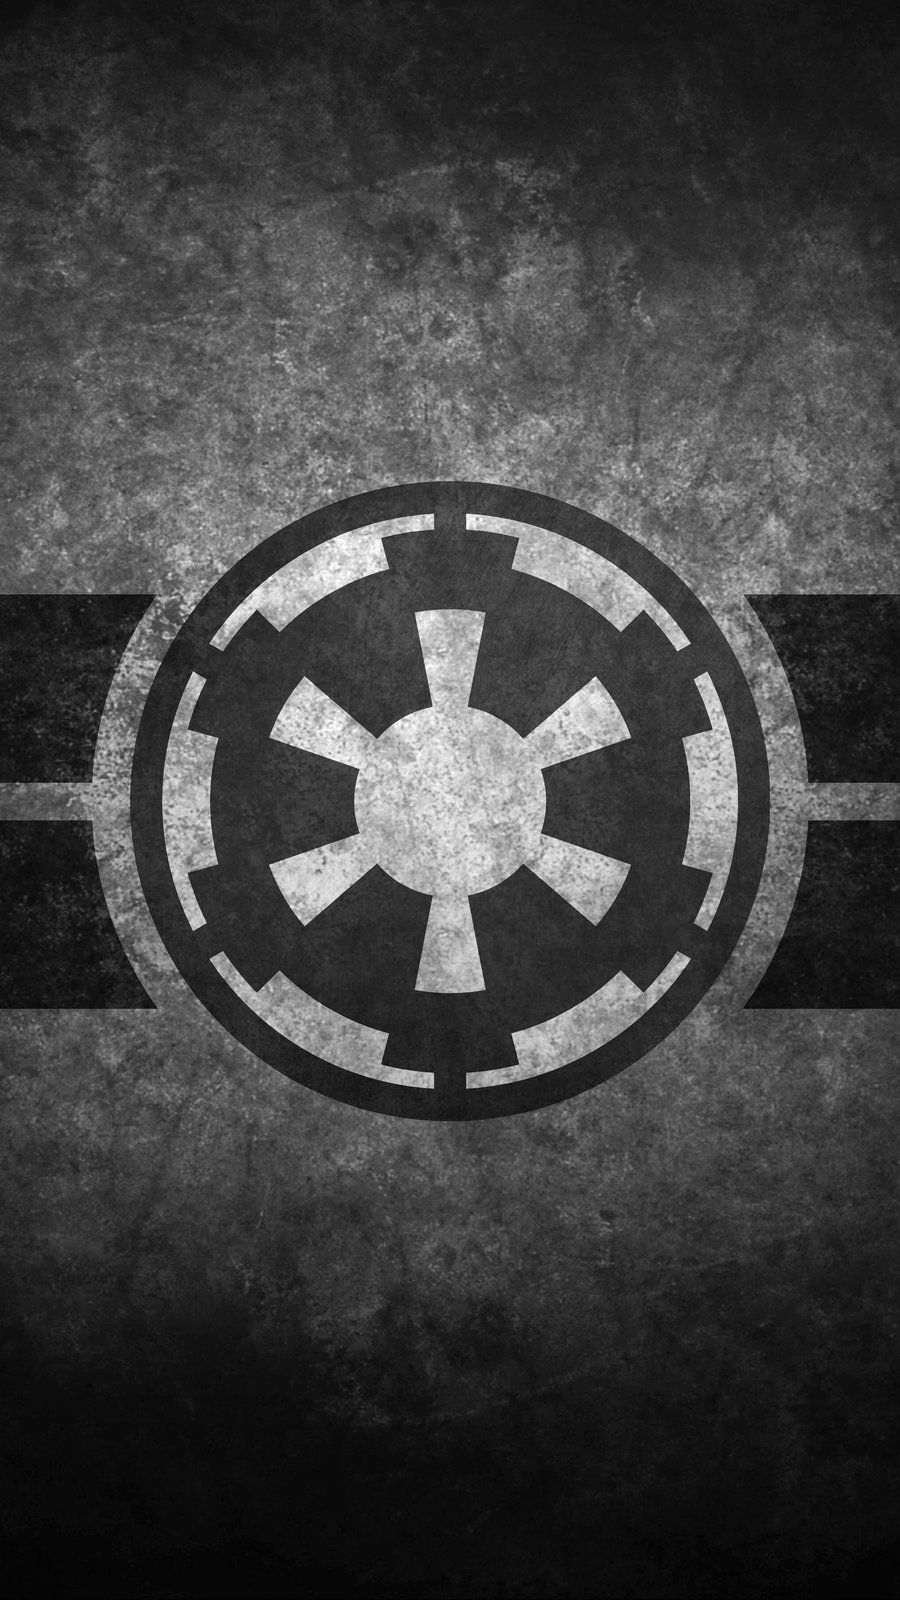 Imperial Cog/Insignia/Symbol Cellphone Wallpaper by swmand4 on